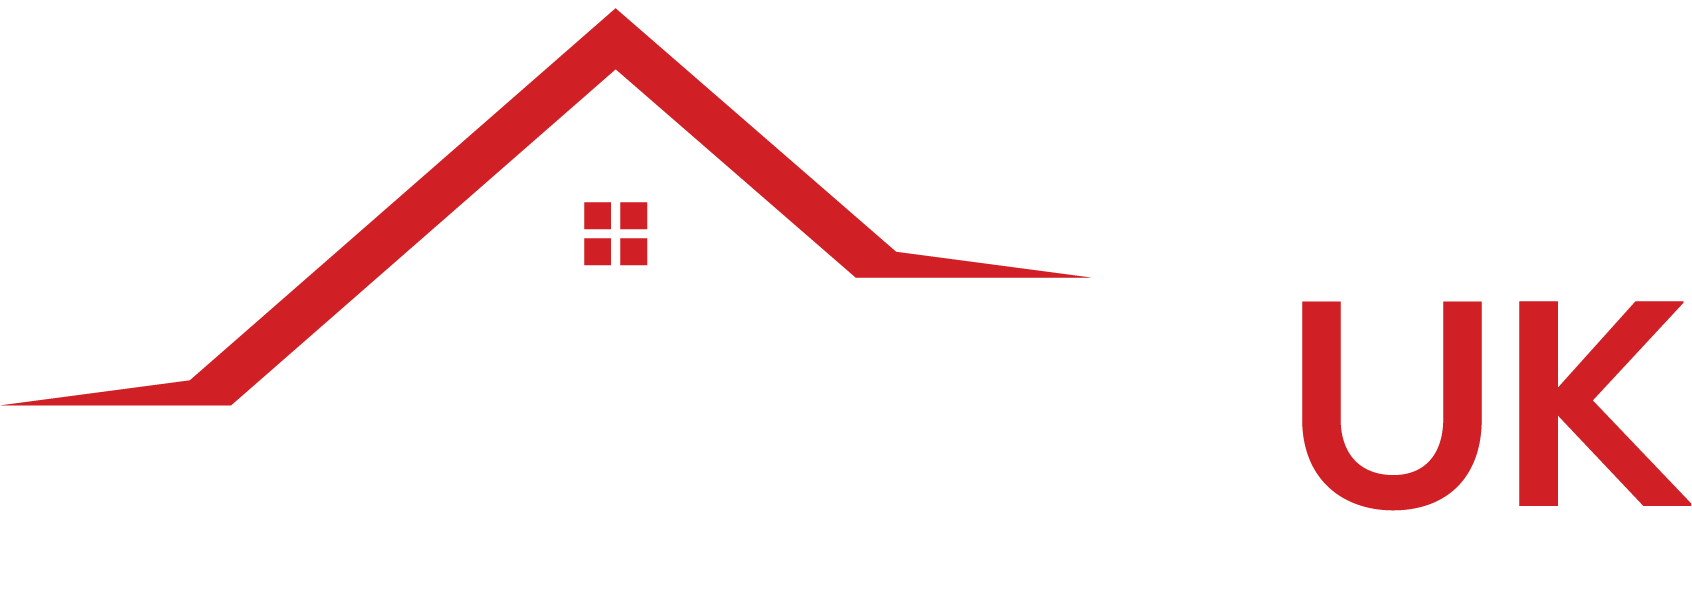 REMOUK – Mortgages Made Simple